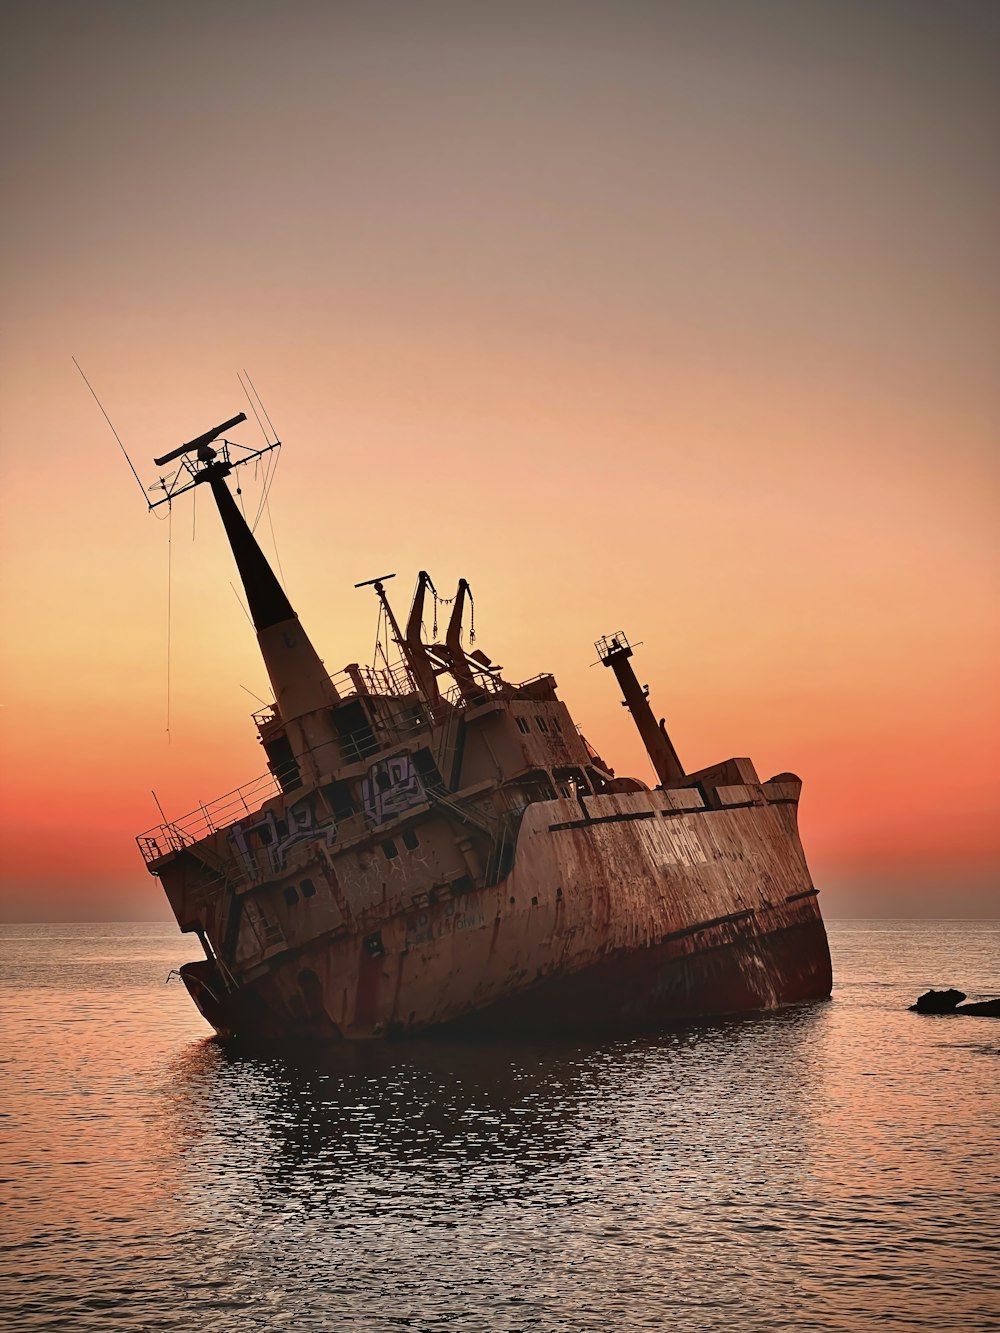 an old rusted ship in the middle of the ocean